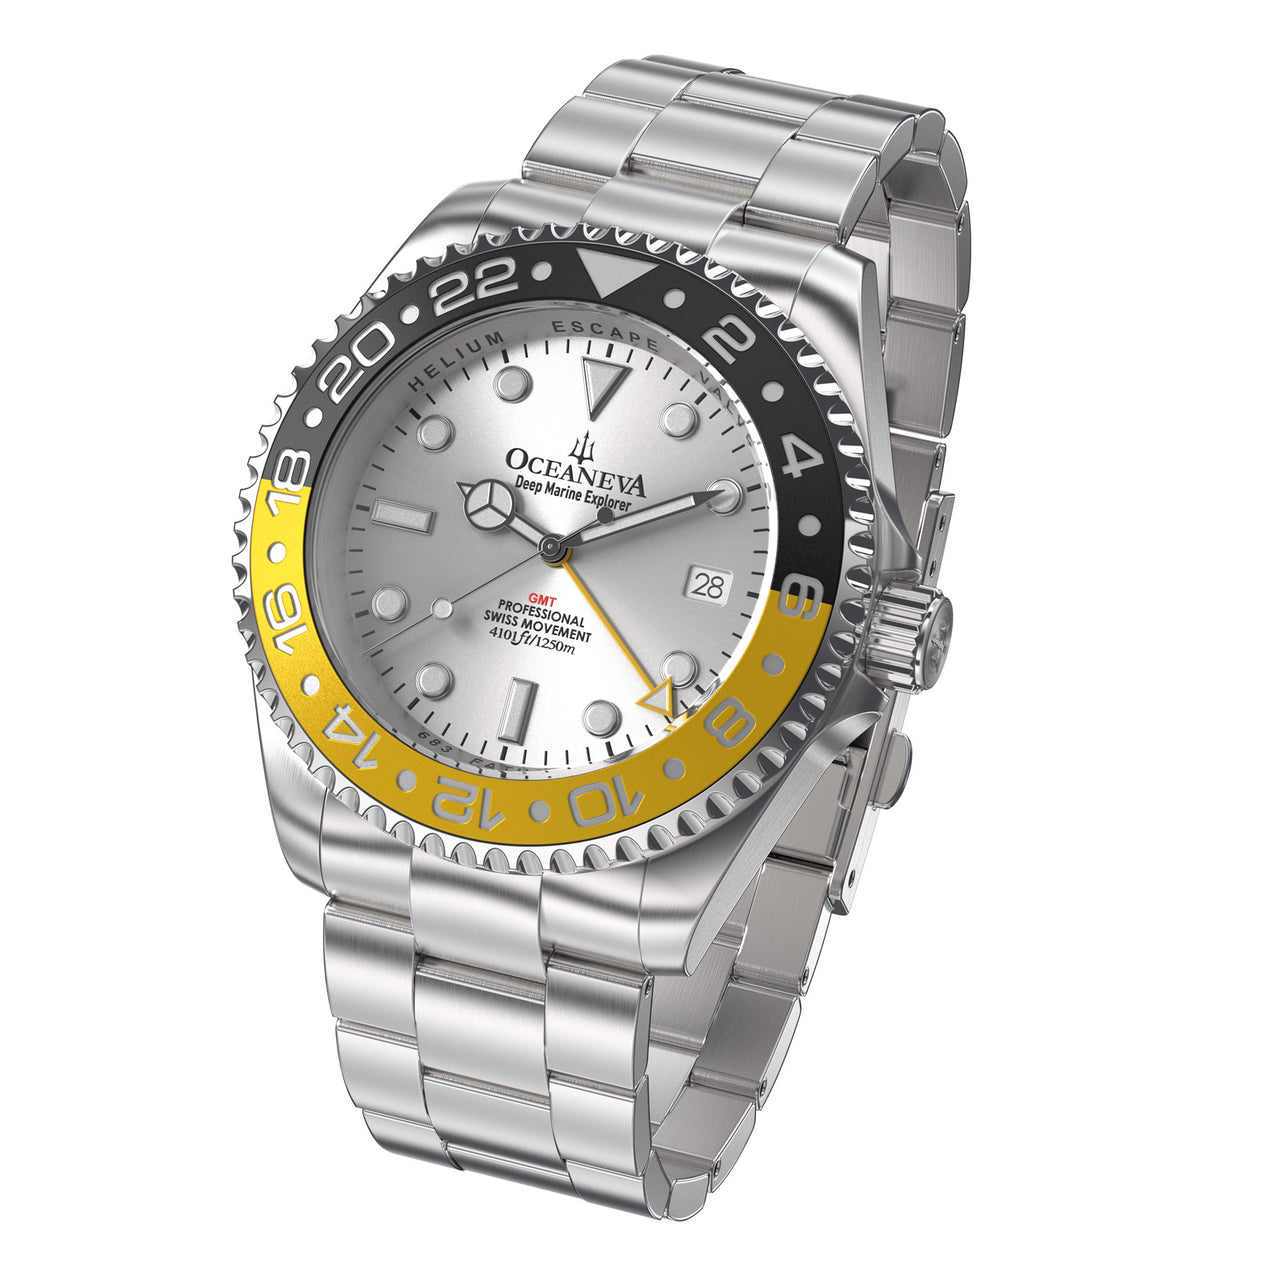 Oceaneva 1250M GMT Dive Watch Silver Black and Yellow Front Picture Slight Left Slant View